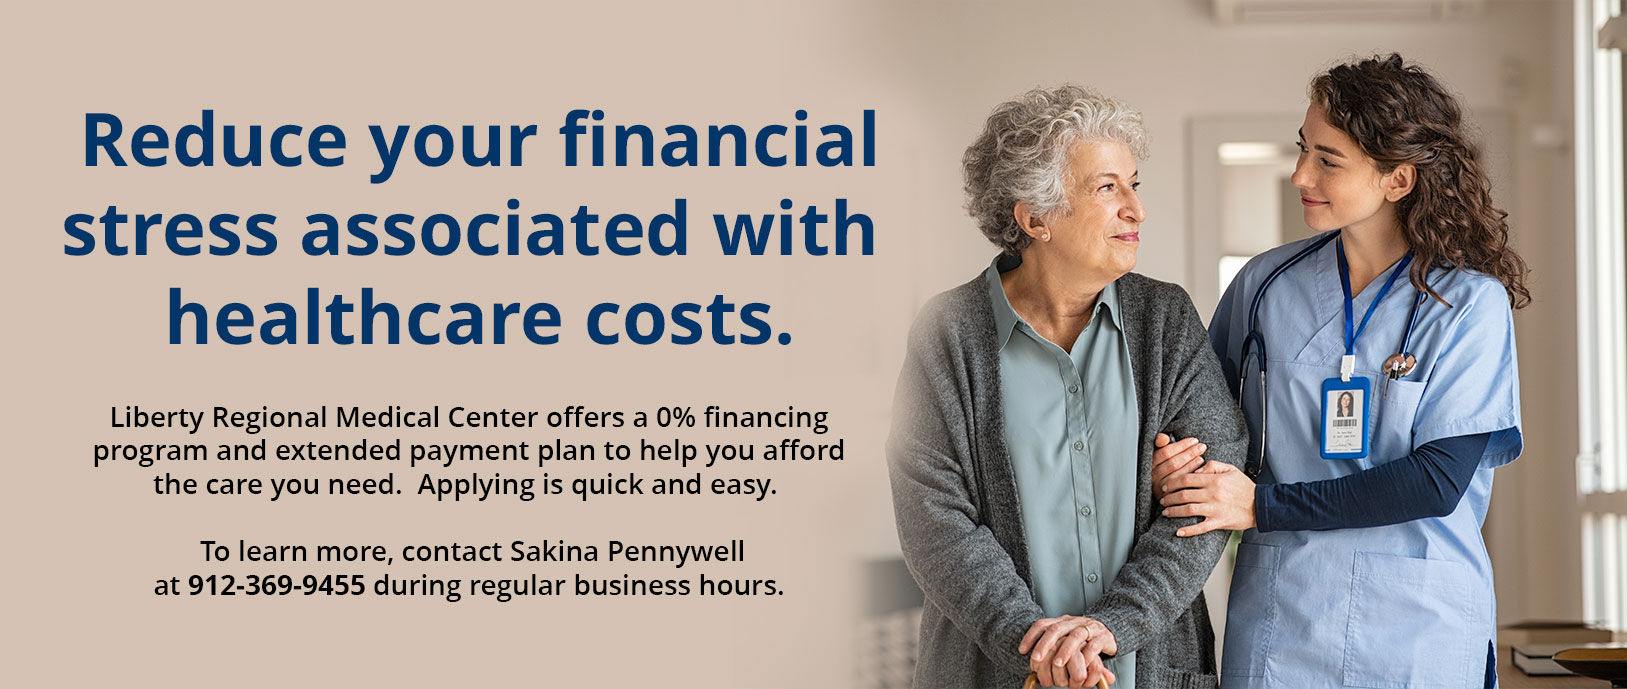 Reduce your financial stress associated with healthcare costs.

Liberty Regional Medical Center offers a 0% financing program and extended payment plan to help you afford the care you need.  Applying is quick and easy.  

To learn more, contact Sakina Pennywell at 912-369-9455 during regular business hours.